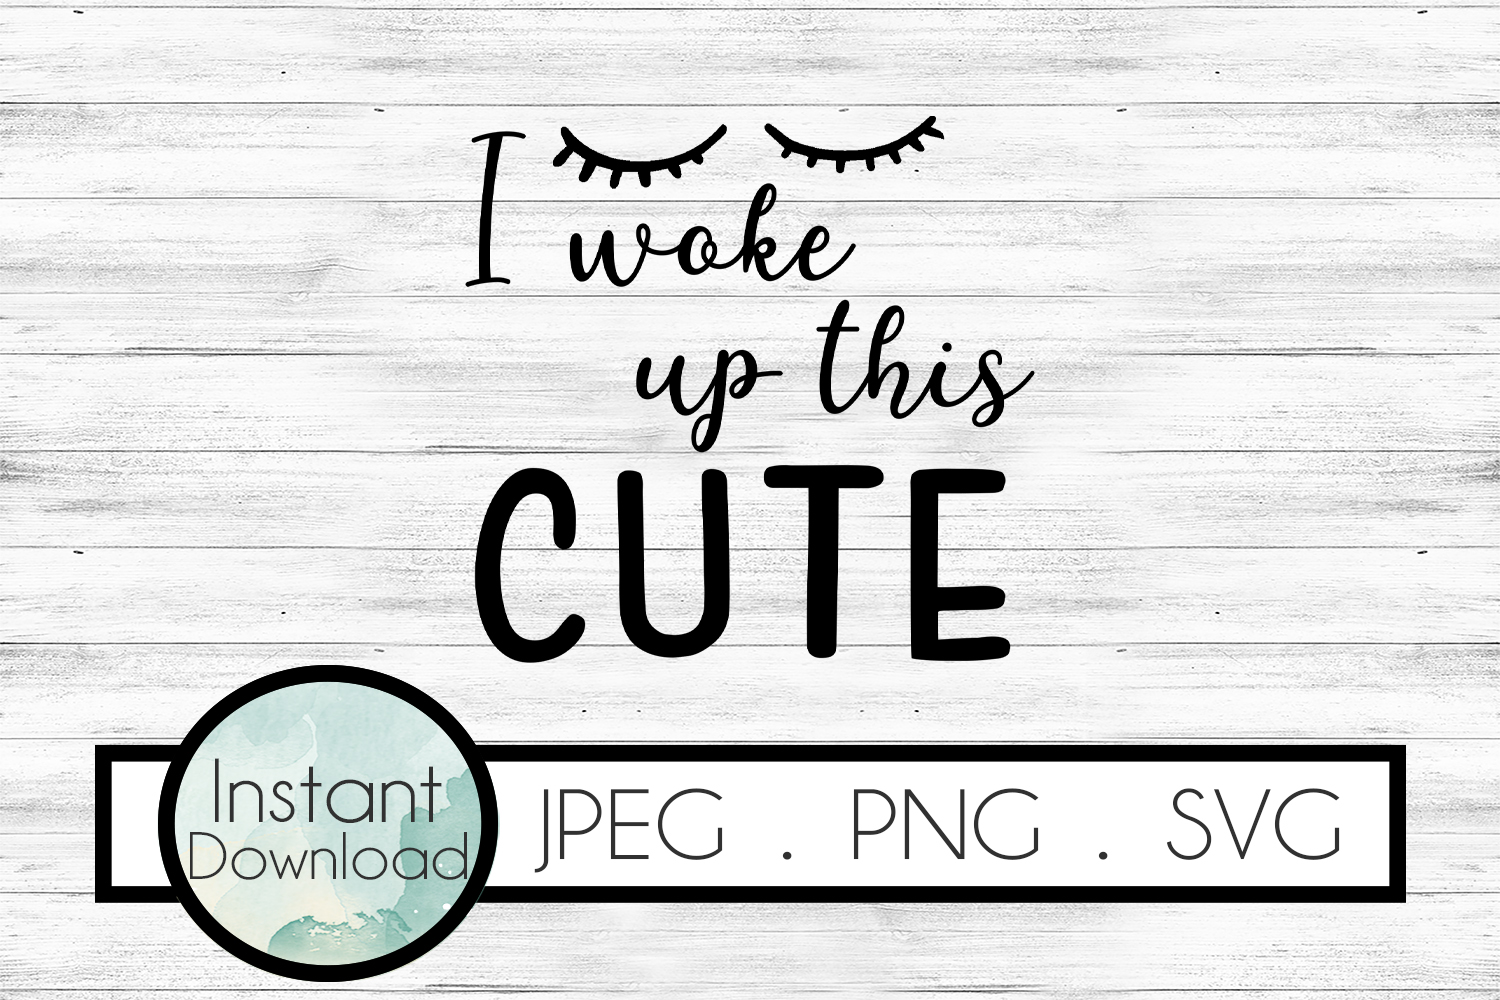 I woke up this cute SVG, Baby SVG, Baby Quotes for Onesies